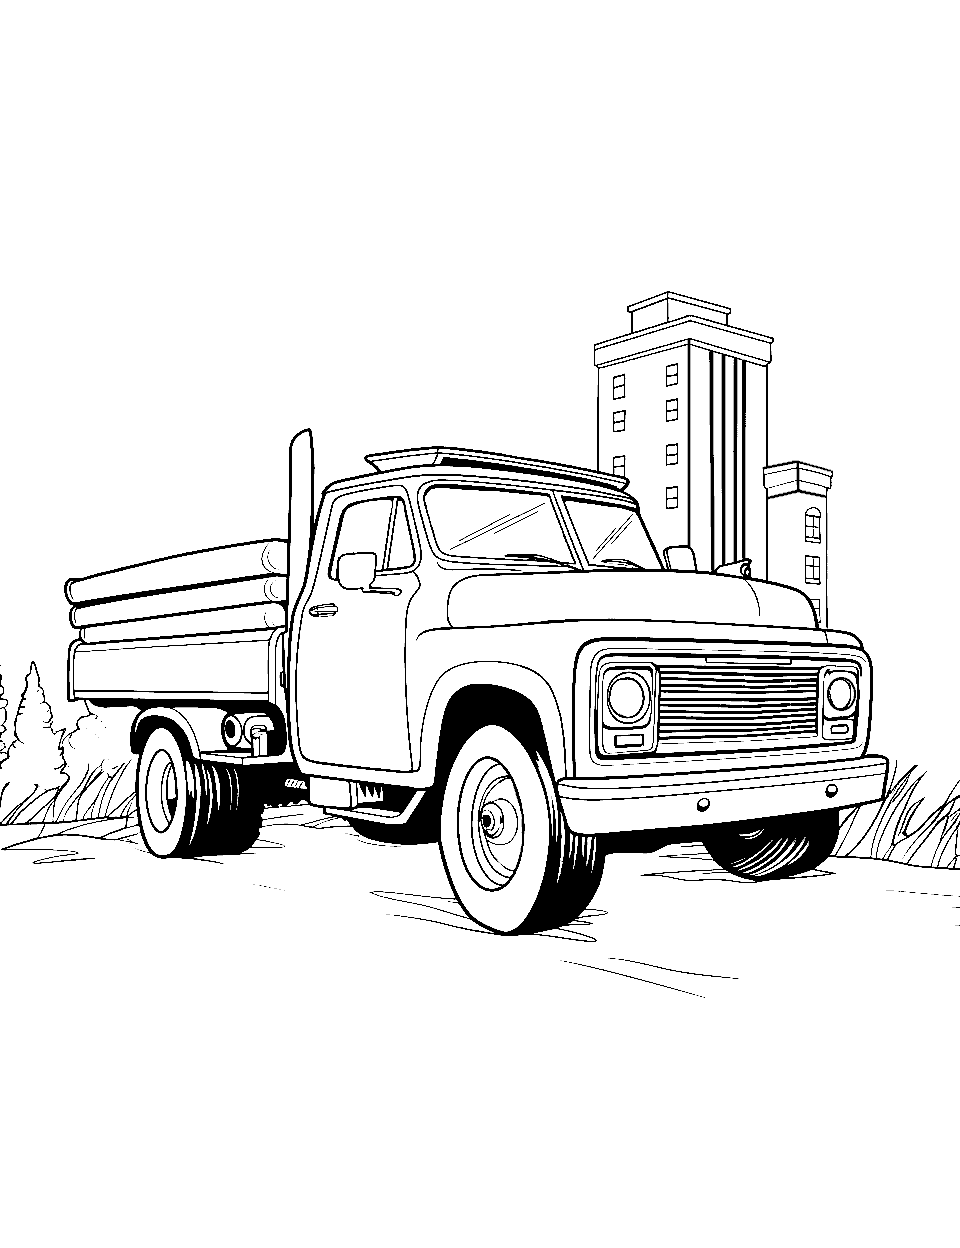 Small Truck at Show Coloring Page - A small truck, polished to shine on its way to a truck show.